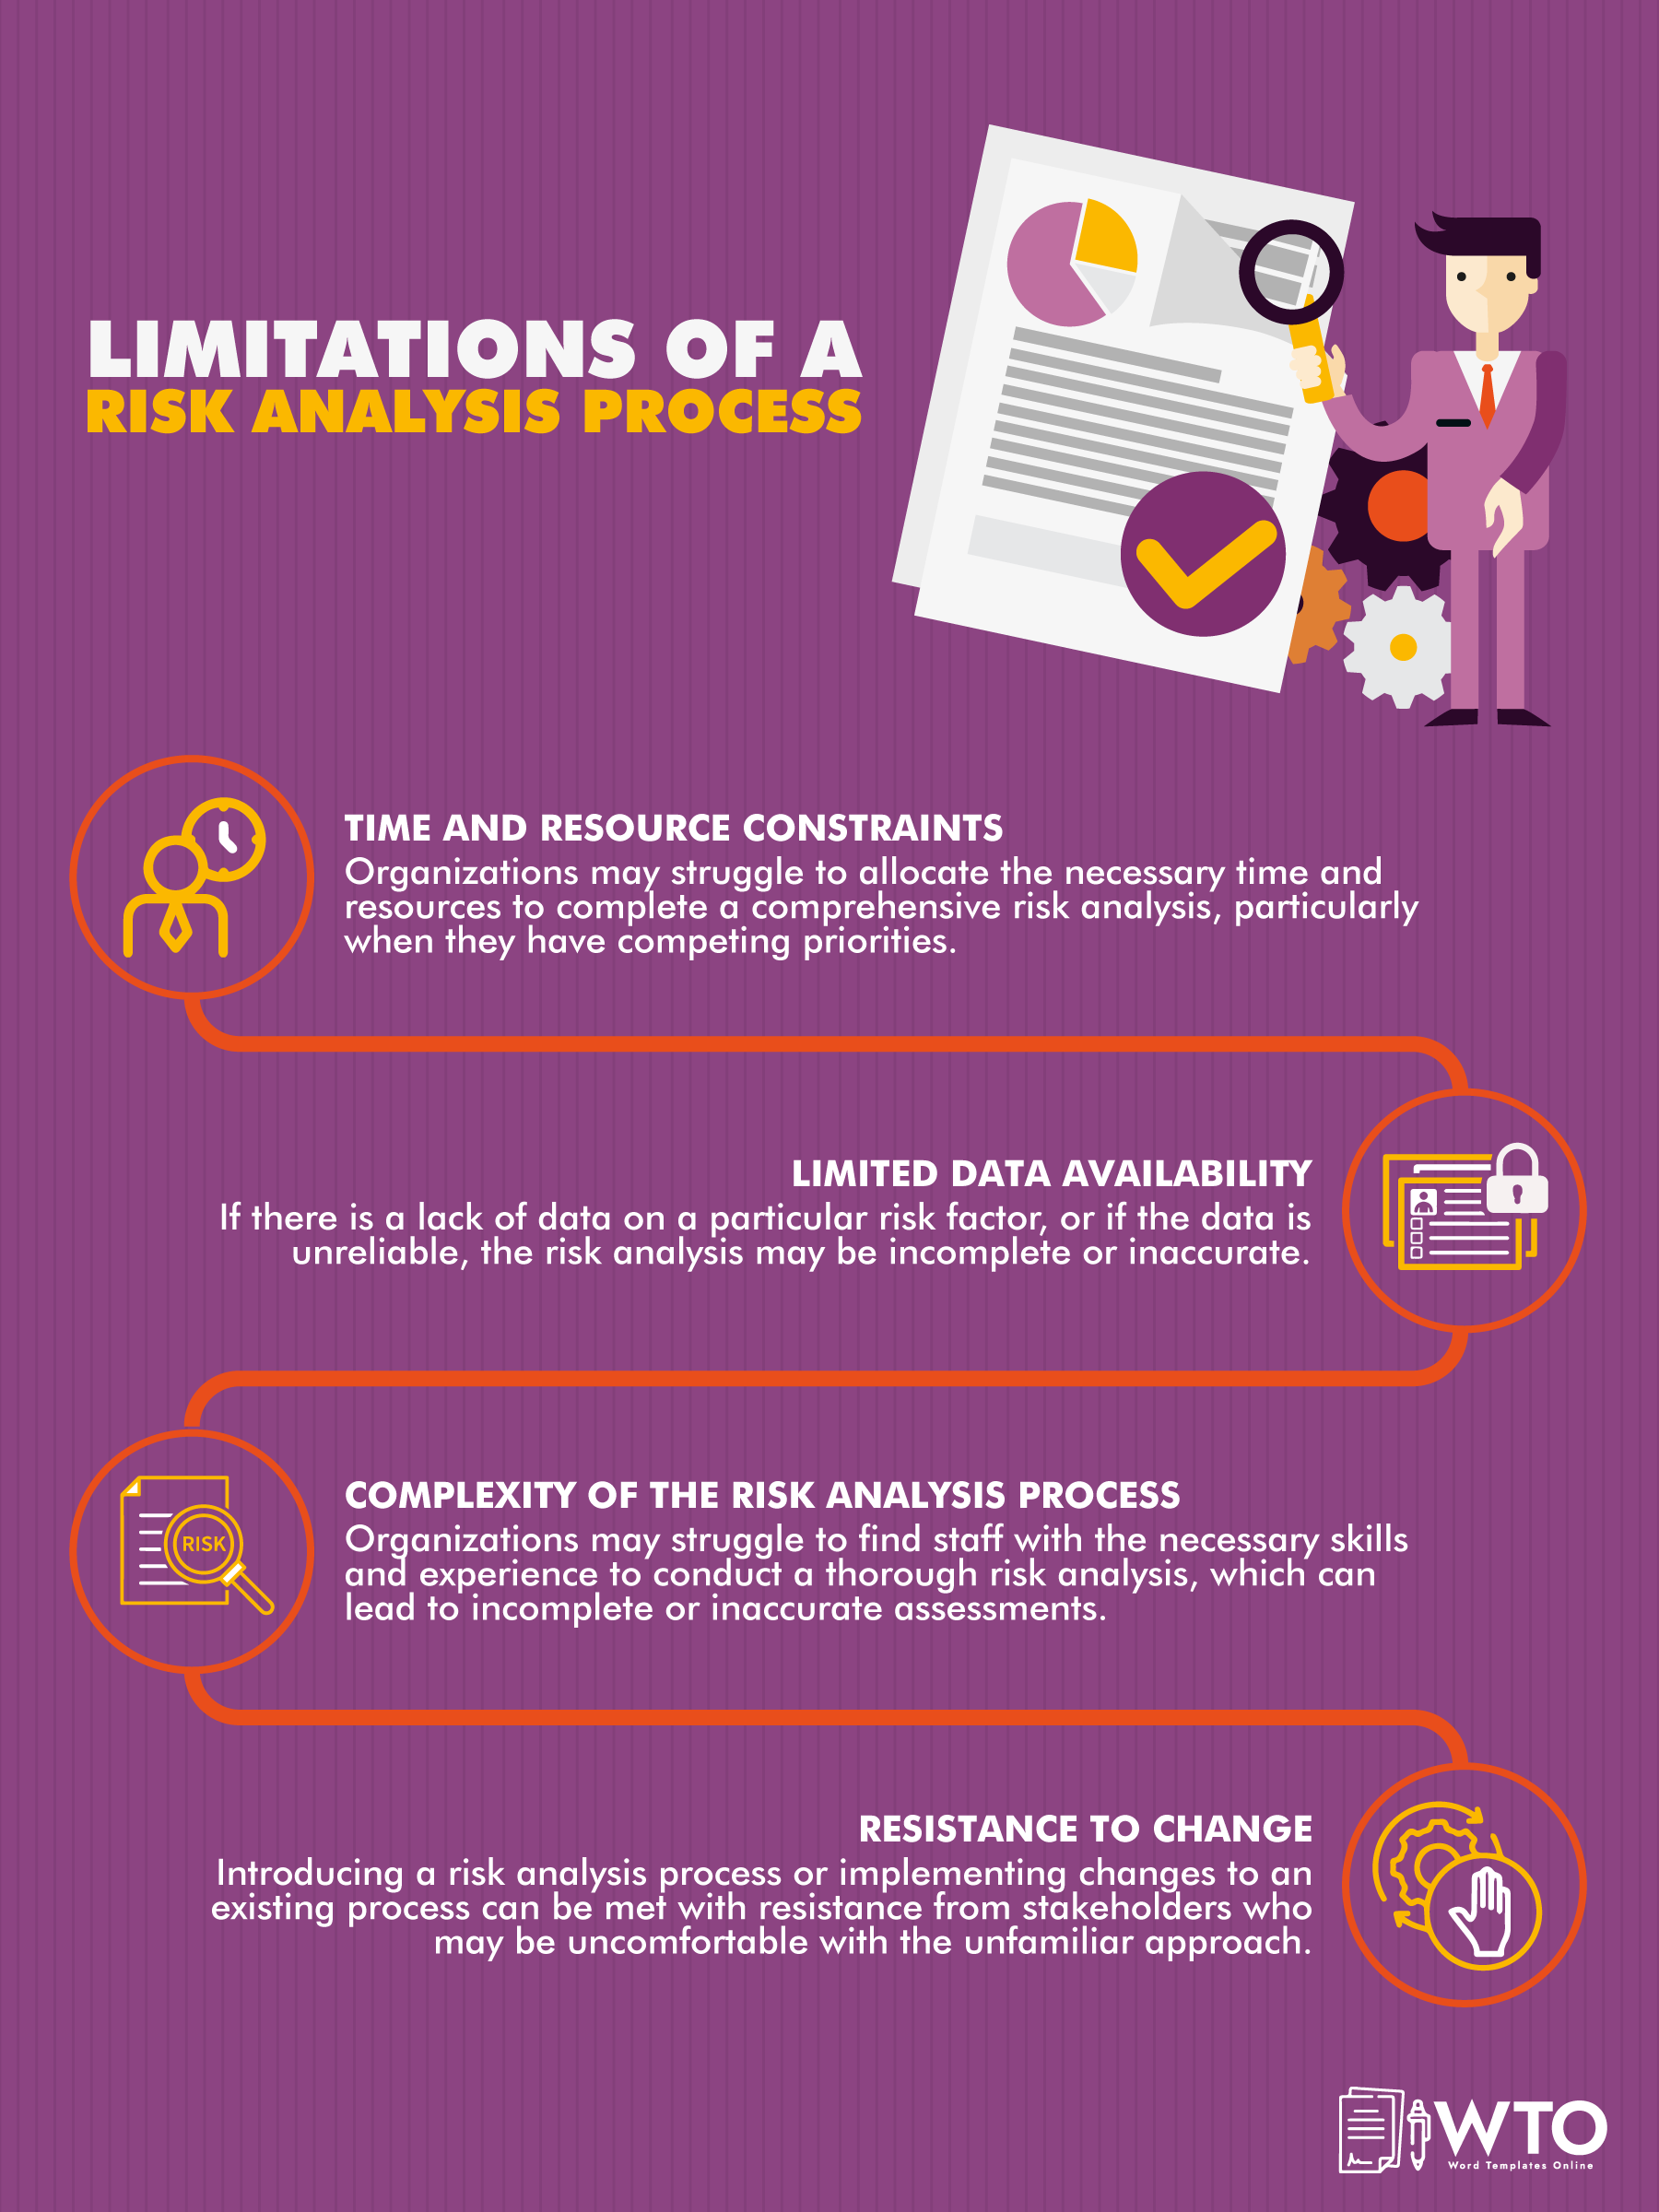 This infographic is about the limitations of a risk analysis process.